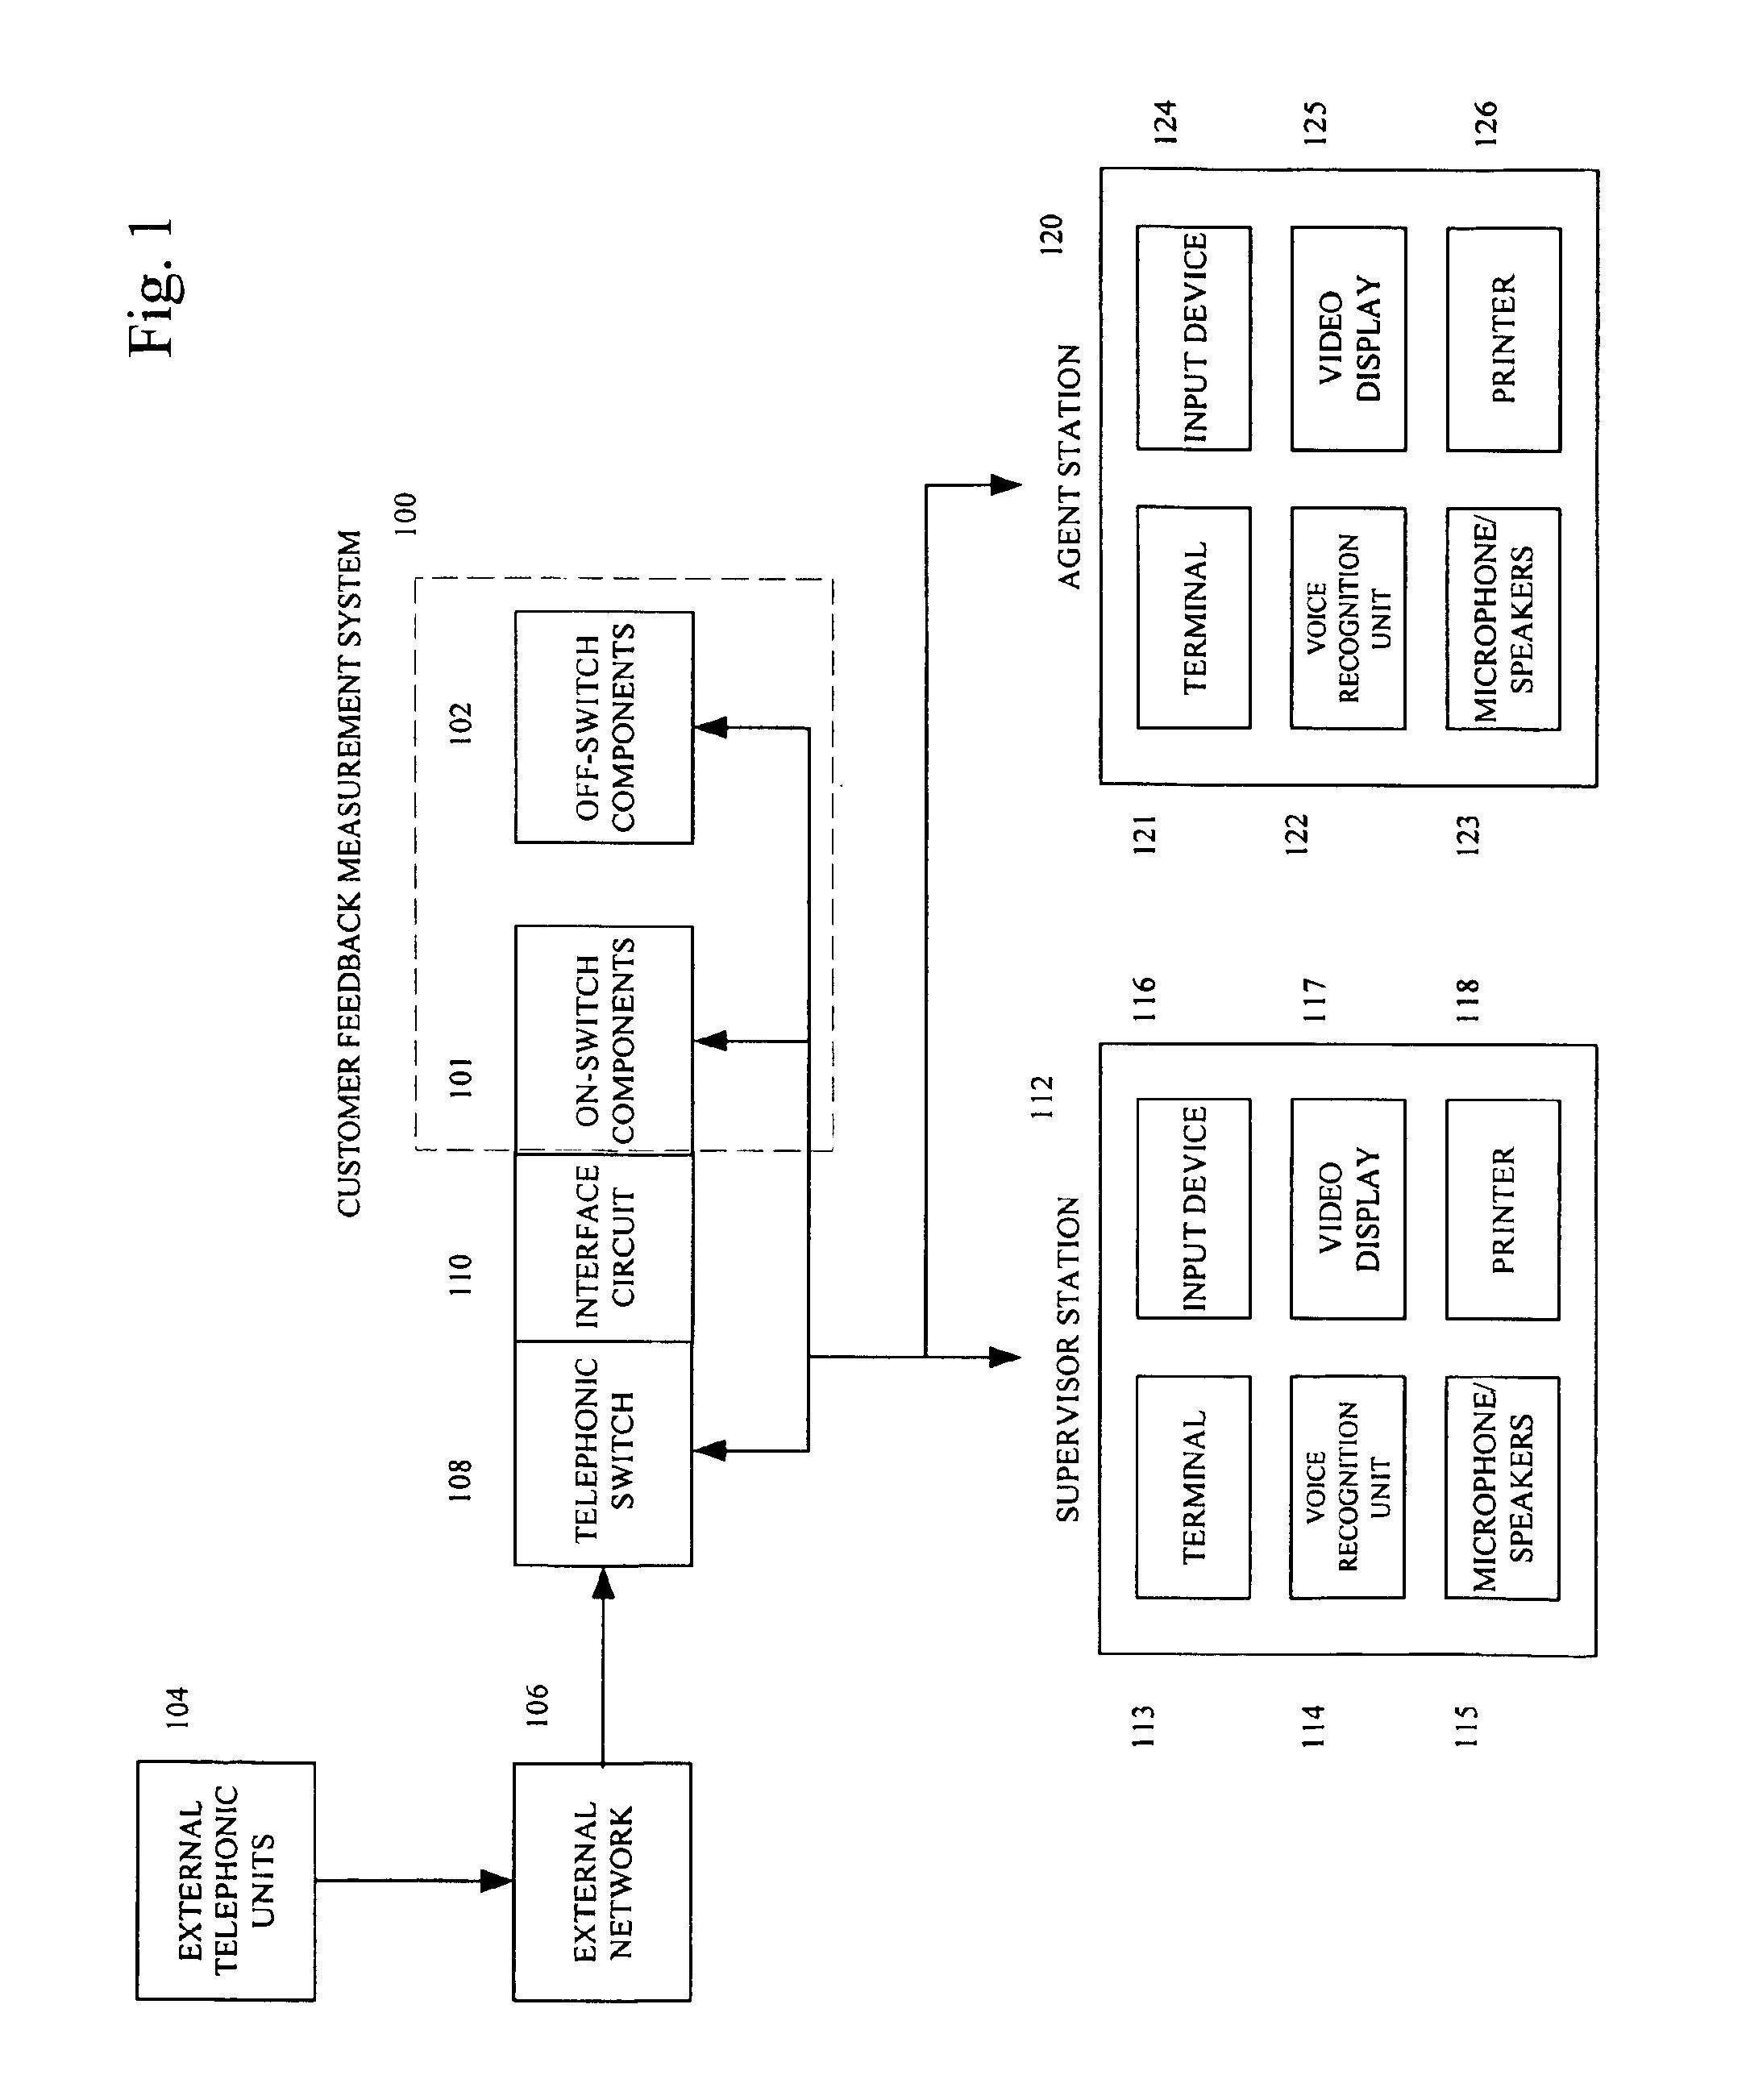 System and method for providing a service to a customer via a communication link